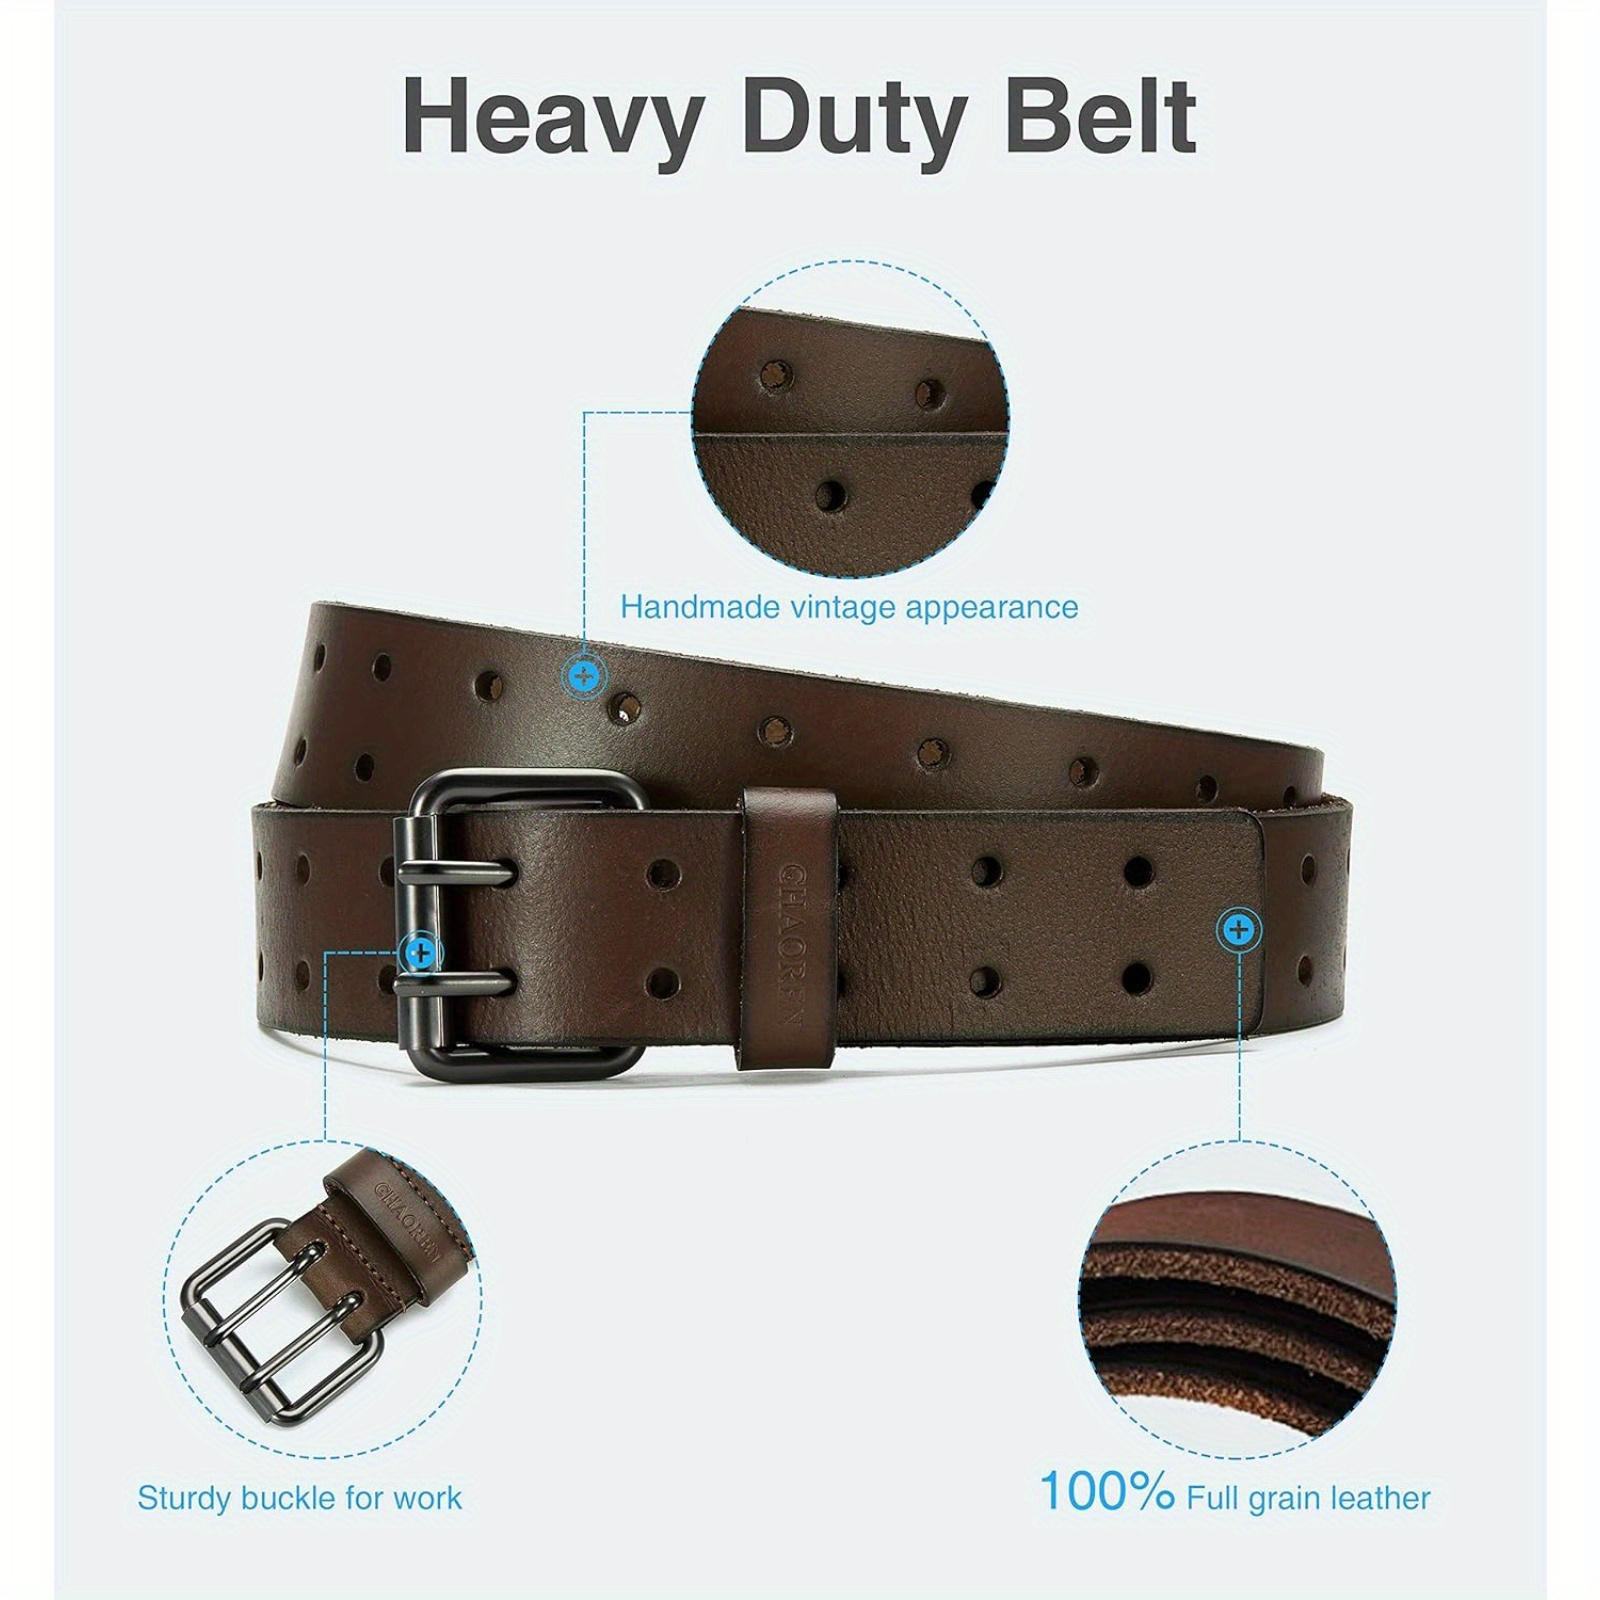 

Chaoren Leather Work Belt - 38mm Double Prong, Handmade And Durable